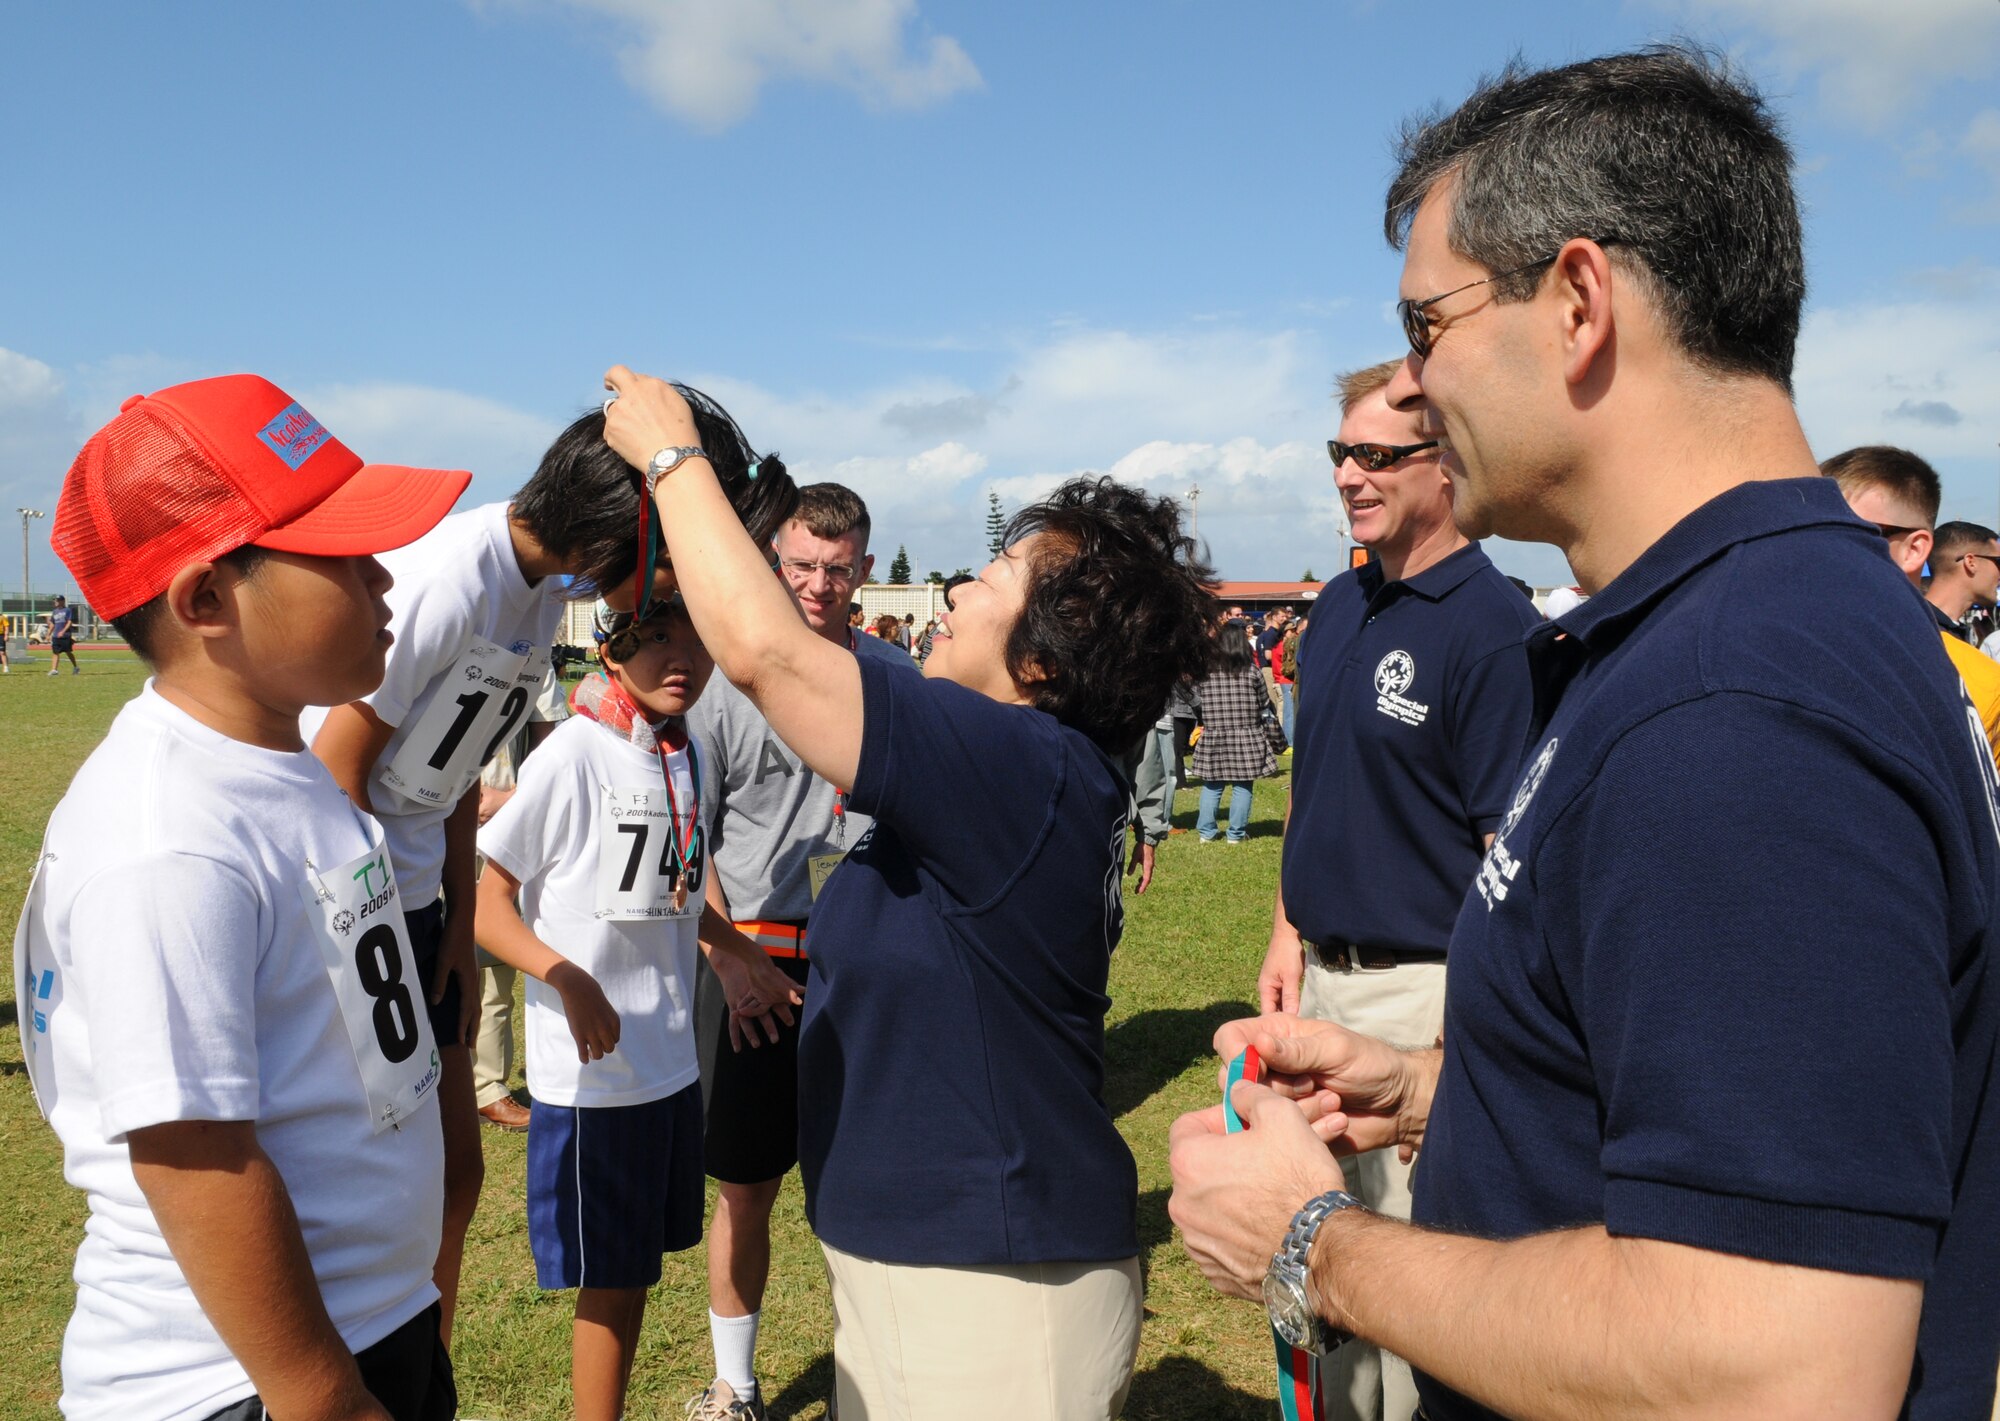 Gen. Ken Wilsbach, 18th Wing commander, presents a medal to an Okinawan athlete after competing in the 30 meter dash during the Kadena Special Olympics Nov. 14, 2009, Kadena Air Base, Japan. Kadena hosted the 10th Annual Special Olympic Games and Art Festival for special needs Okinawan and American adult and child athletes.  (U.S. Air Force photo/Airman 1st Class Amanda Grabiec) 